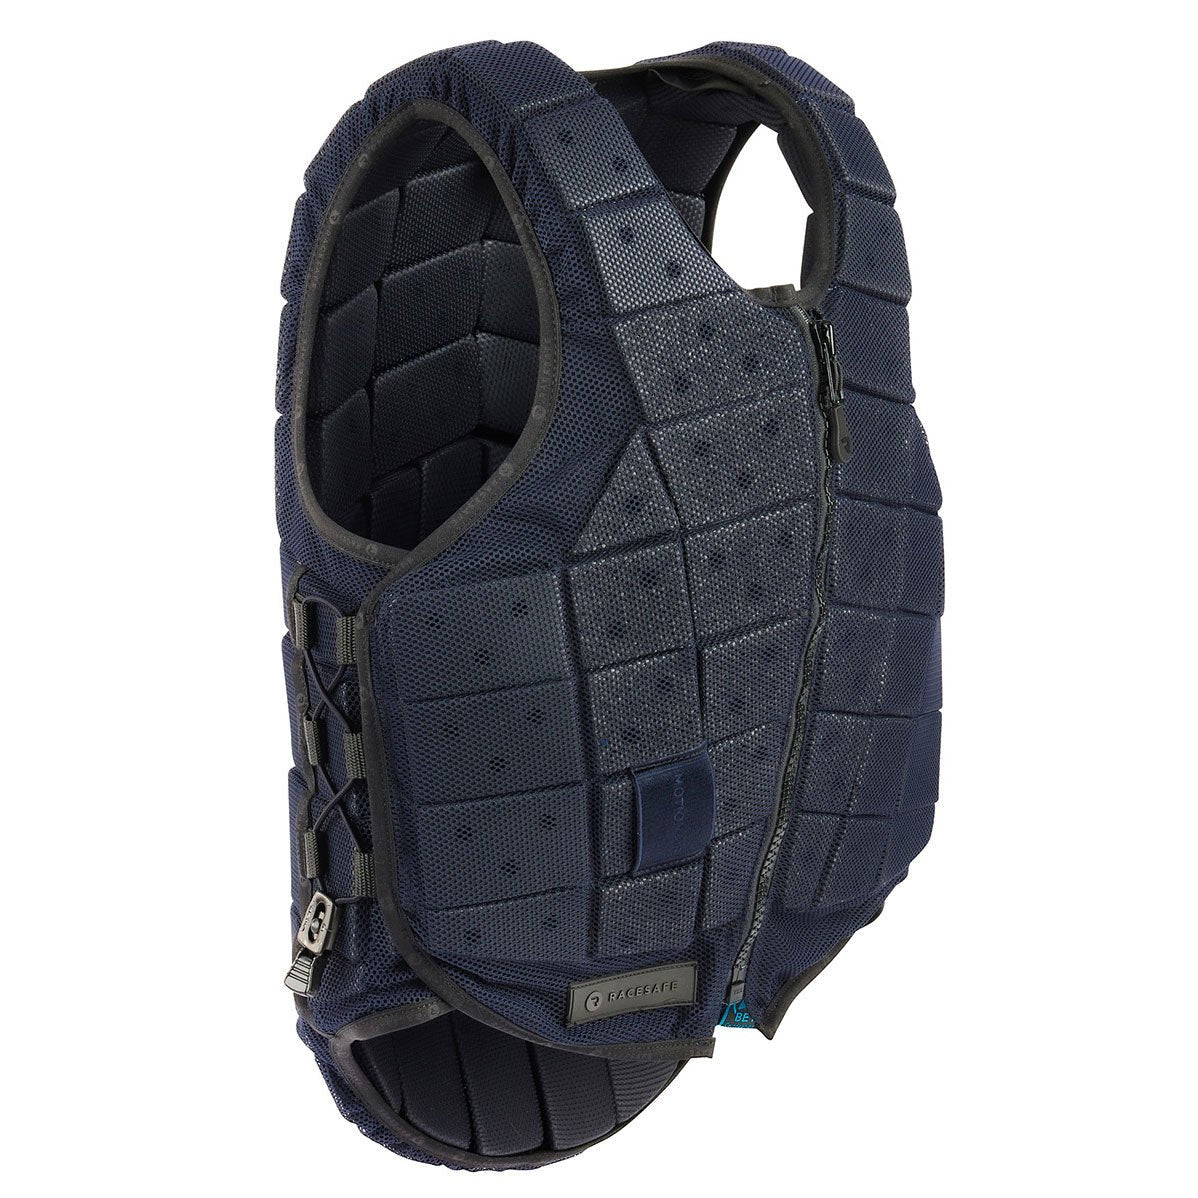 Racesafe Motion 3 Lightweight Body Protector - Young Riders - Navy - Extra Small